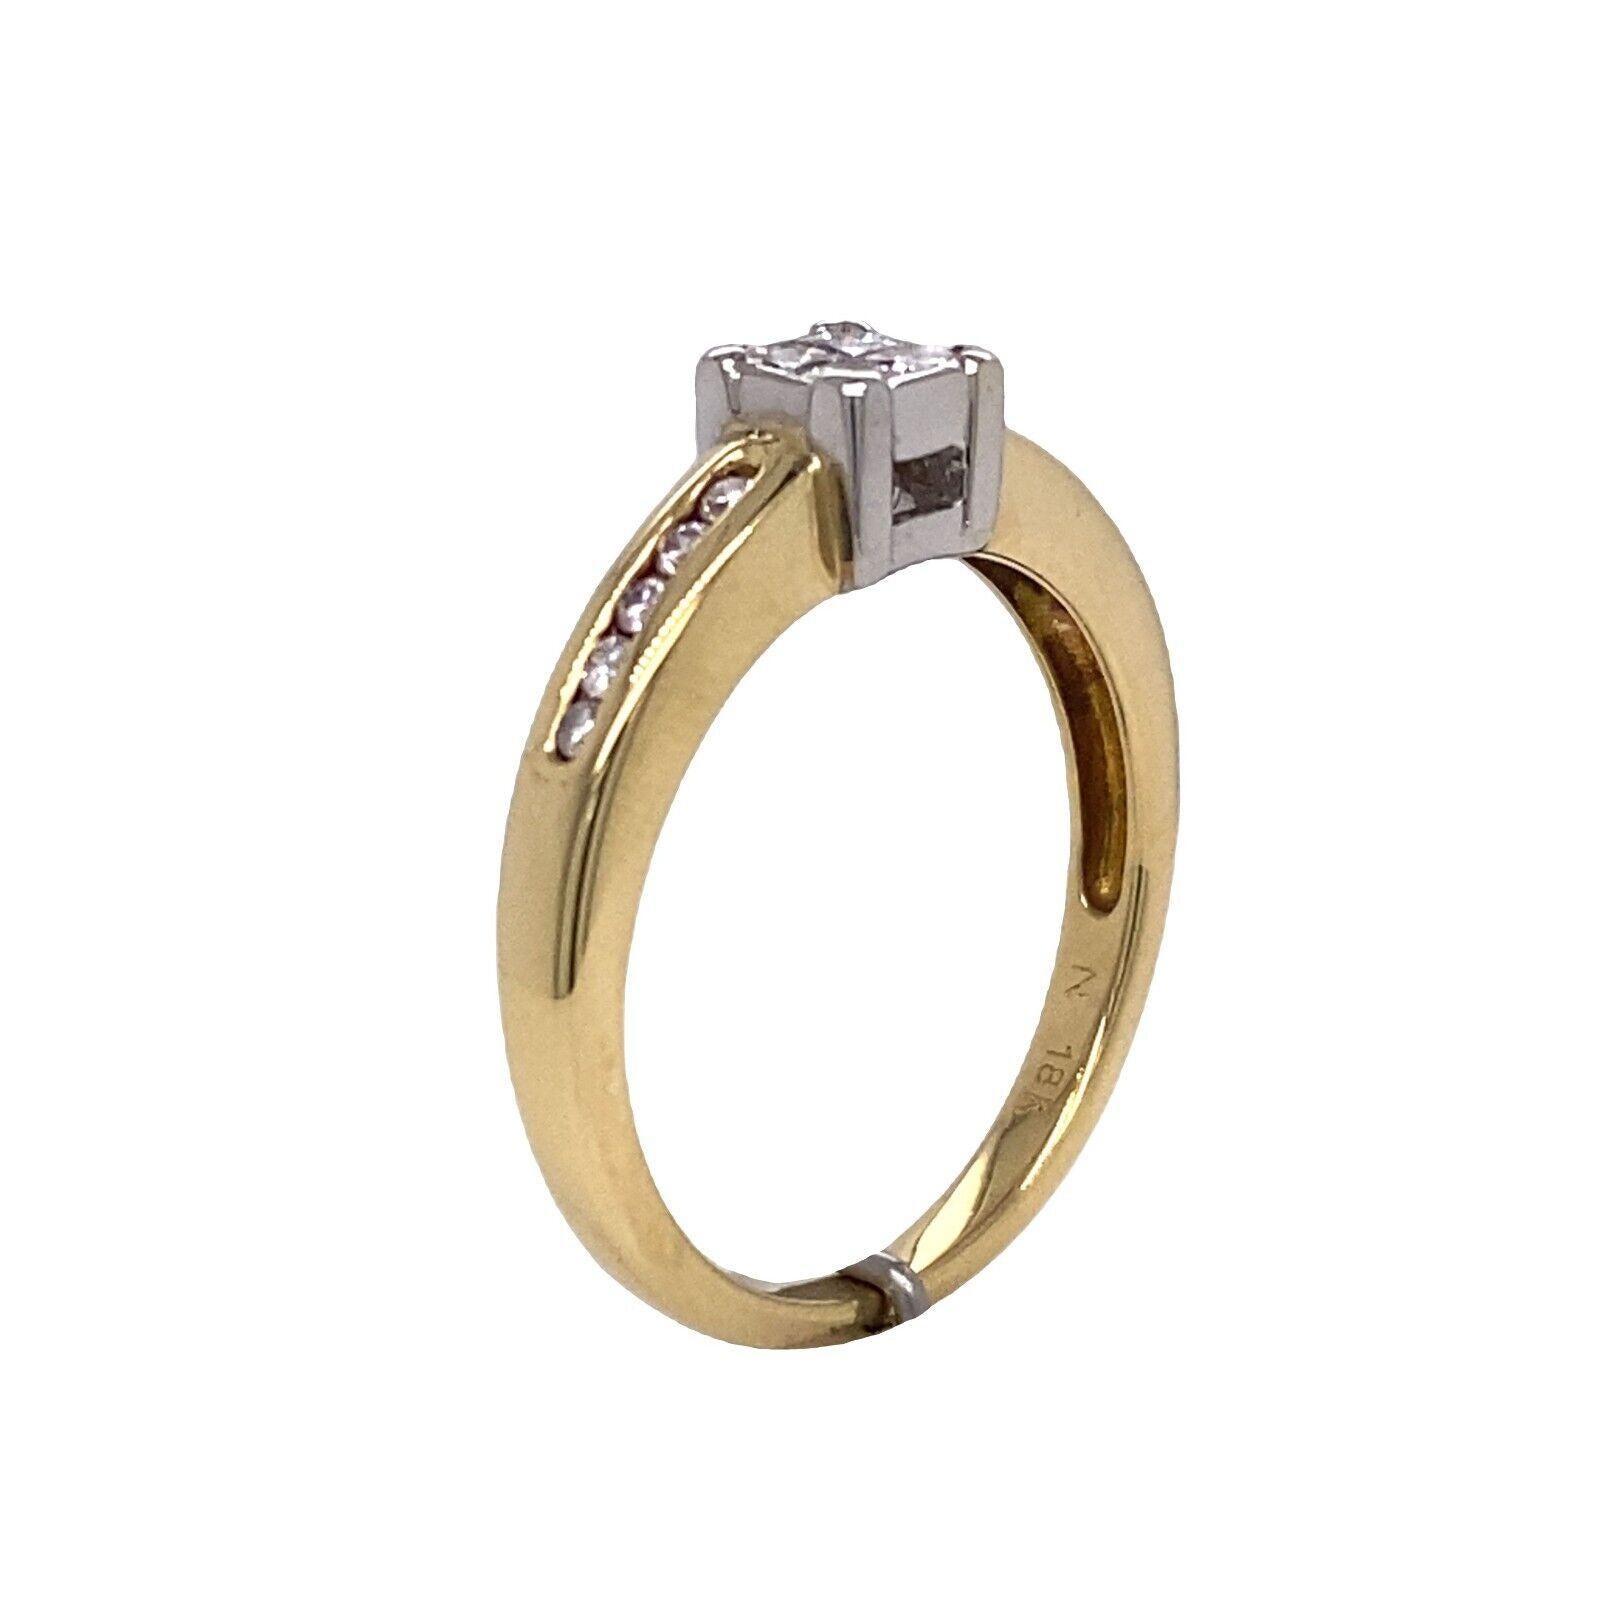 Princess Cut & Round Diamond Solitaire Ring, Set In 18ct Yellow & White Gold.

This 18ct yellow &white gold solitaire diamond ring is set with 0.25ct of natural round brilliant cut & princess cut diamond. The ring is a perfect symbol of your